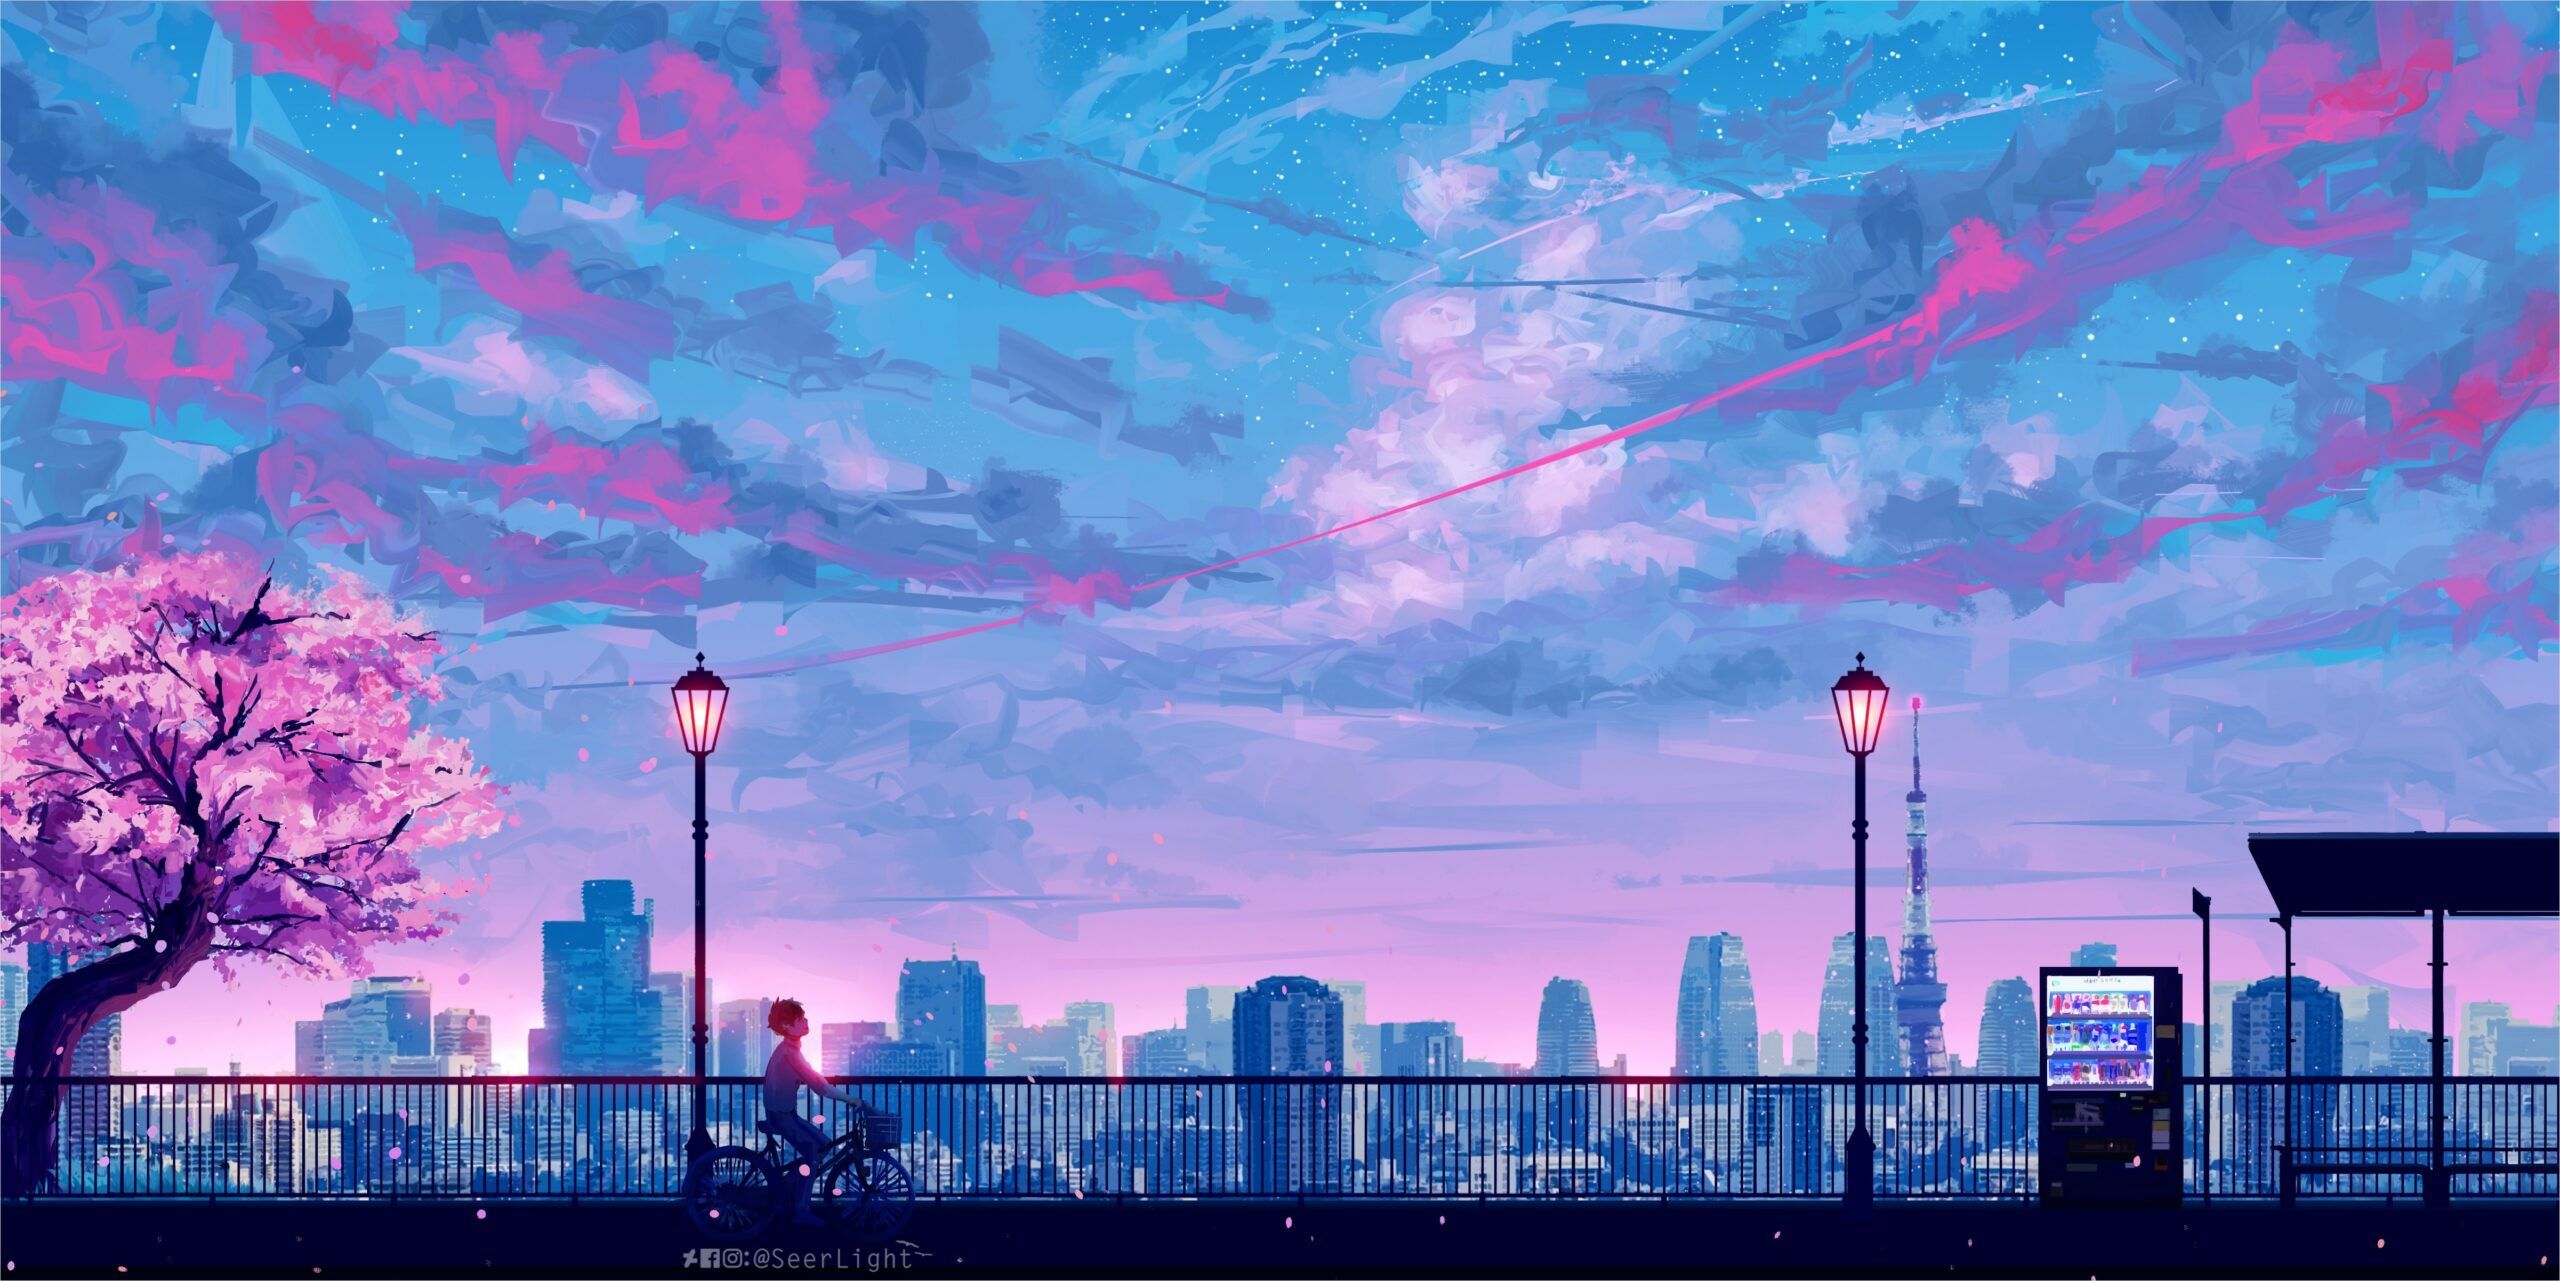 Anime Aesthetic PC Wallpapers on